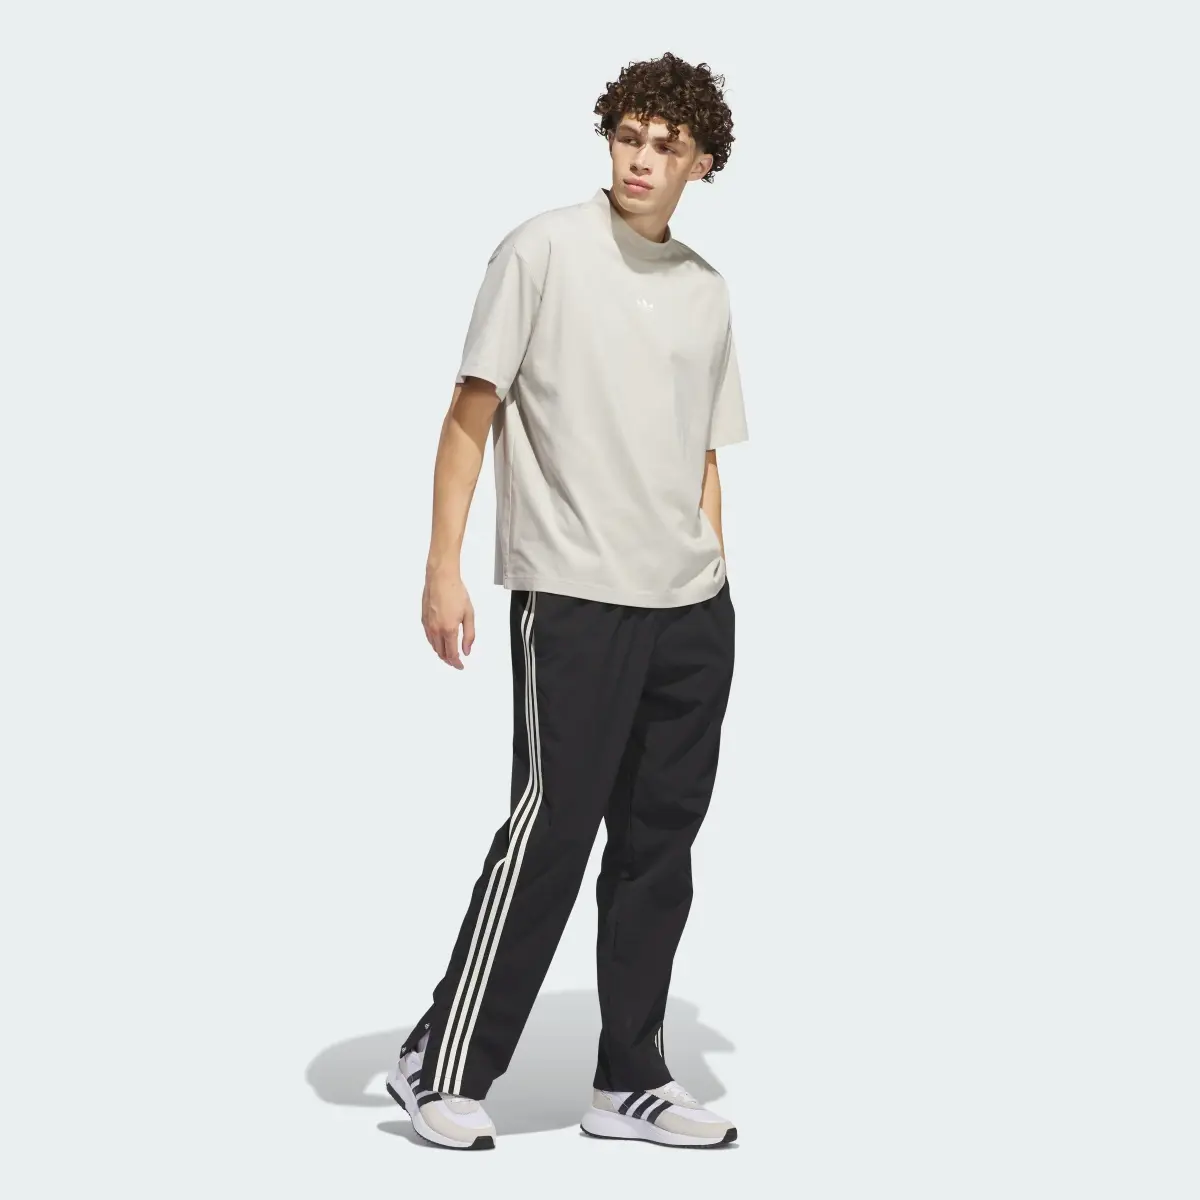 Adidas Basketball Track Suit Pants (Gender Neutral). 3